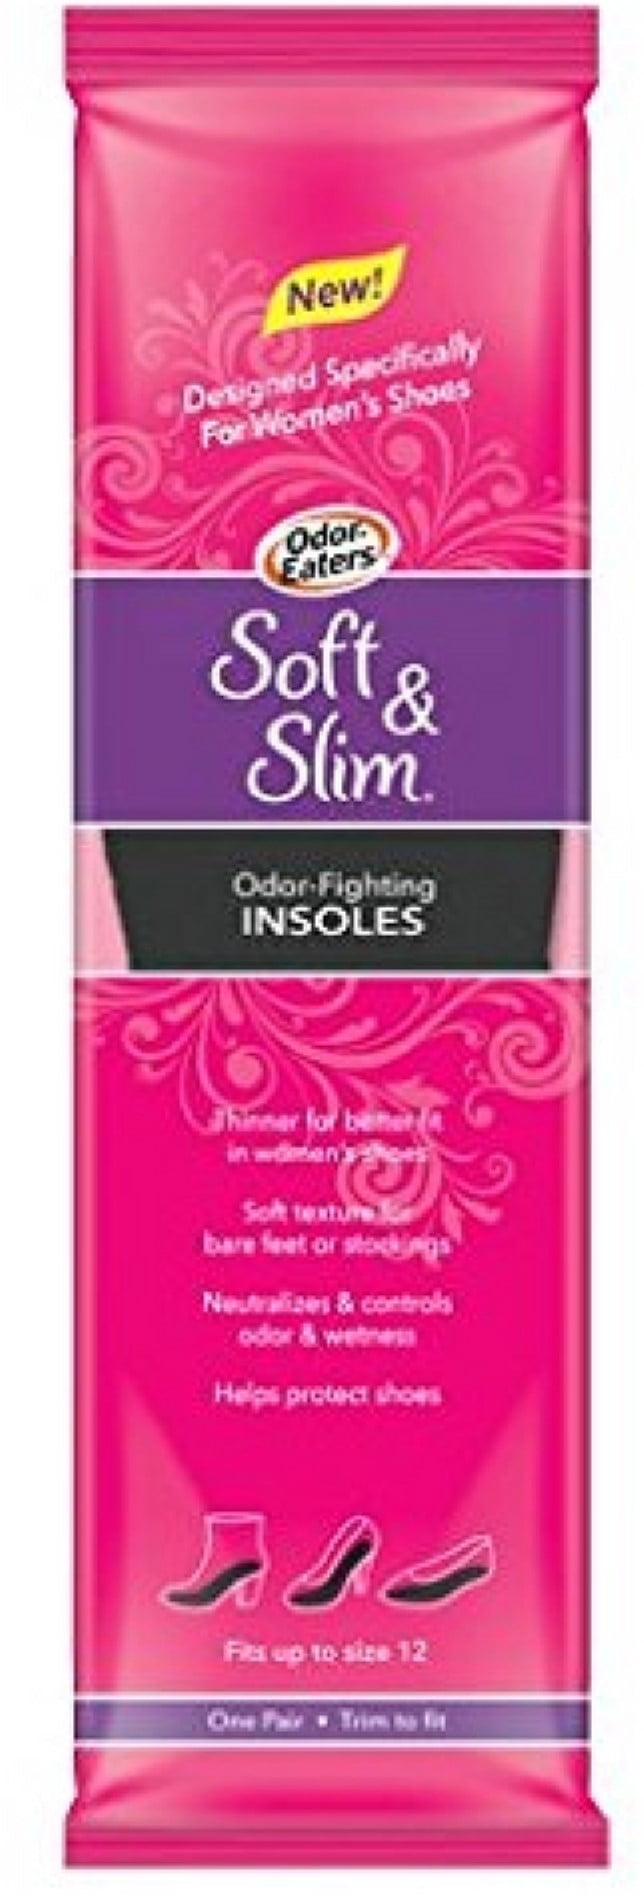 odor eaters soft and slim